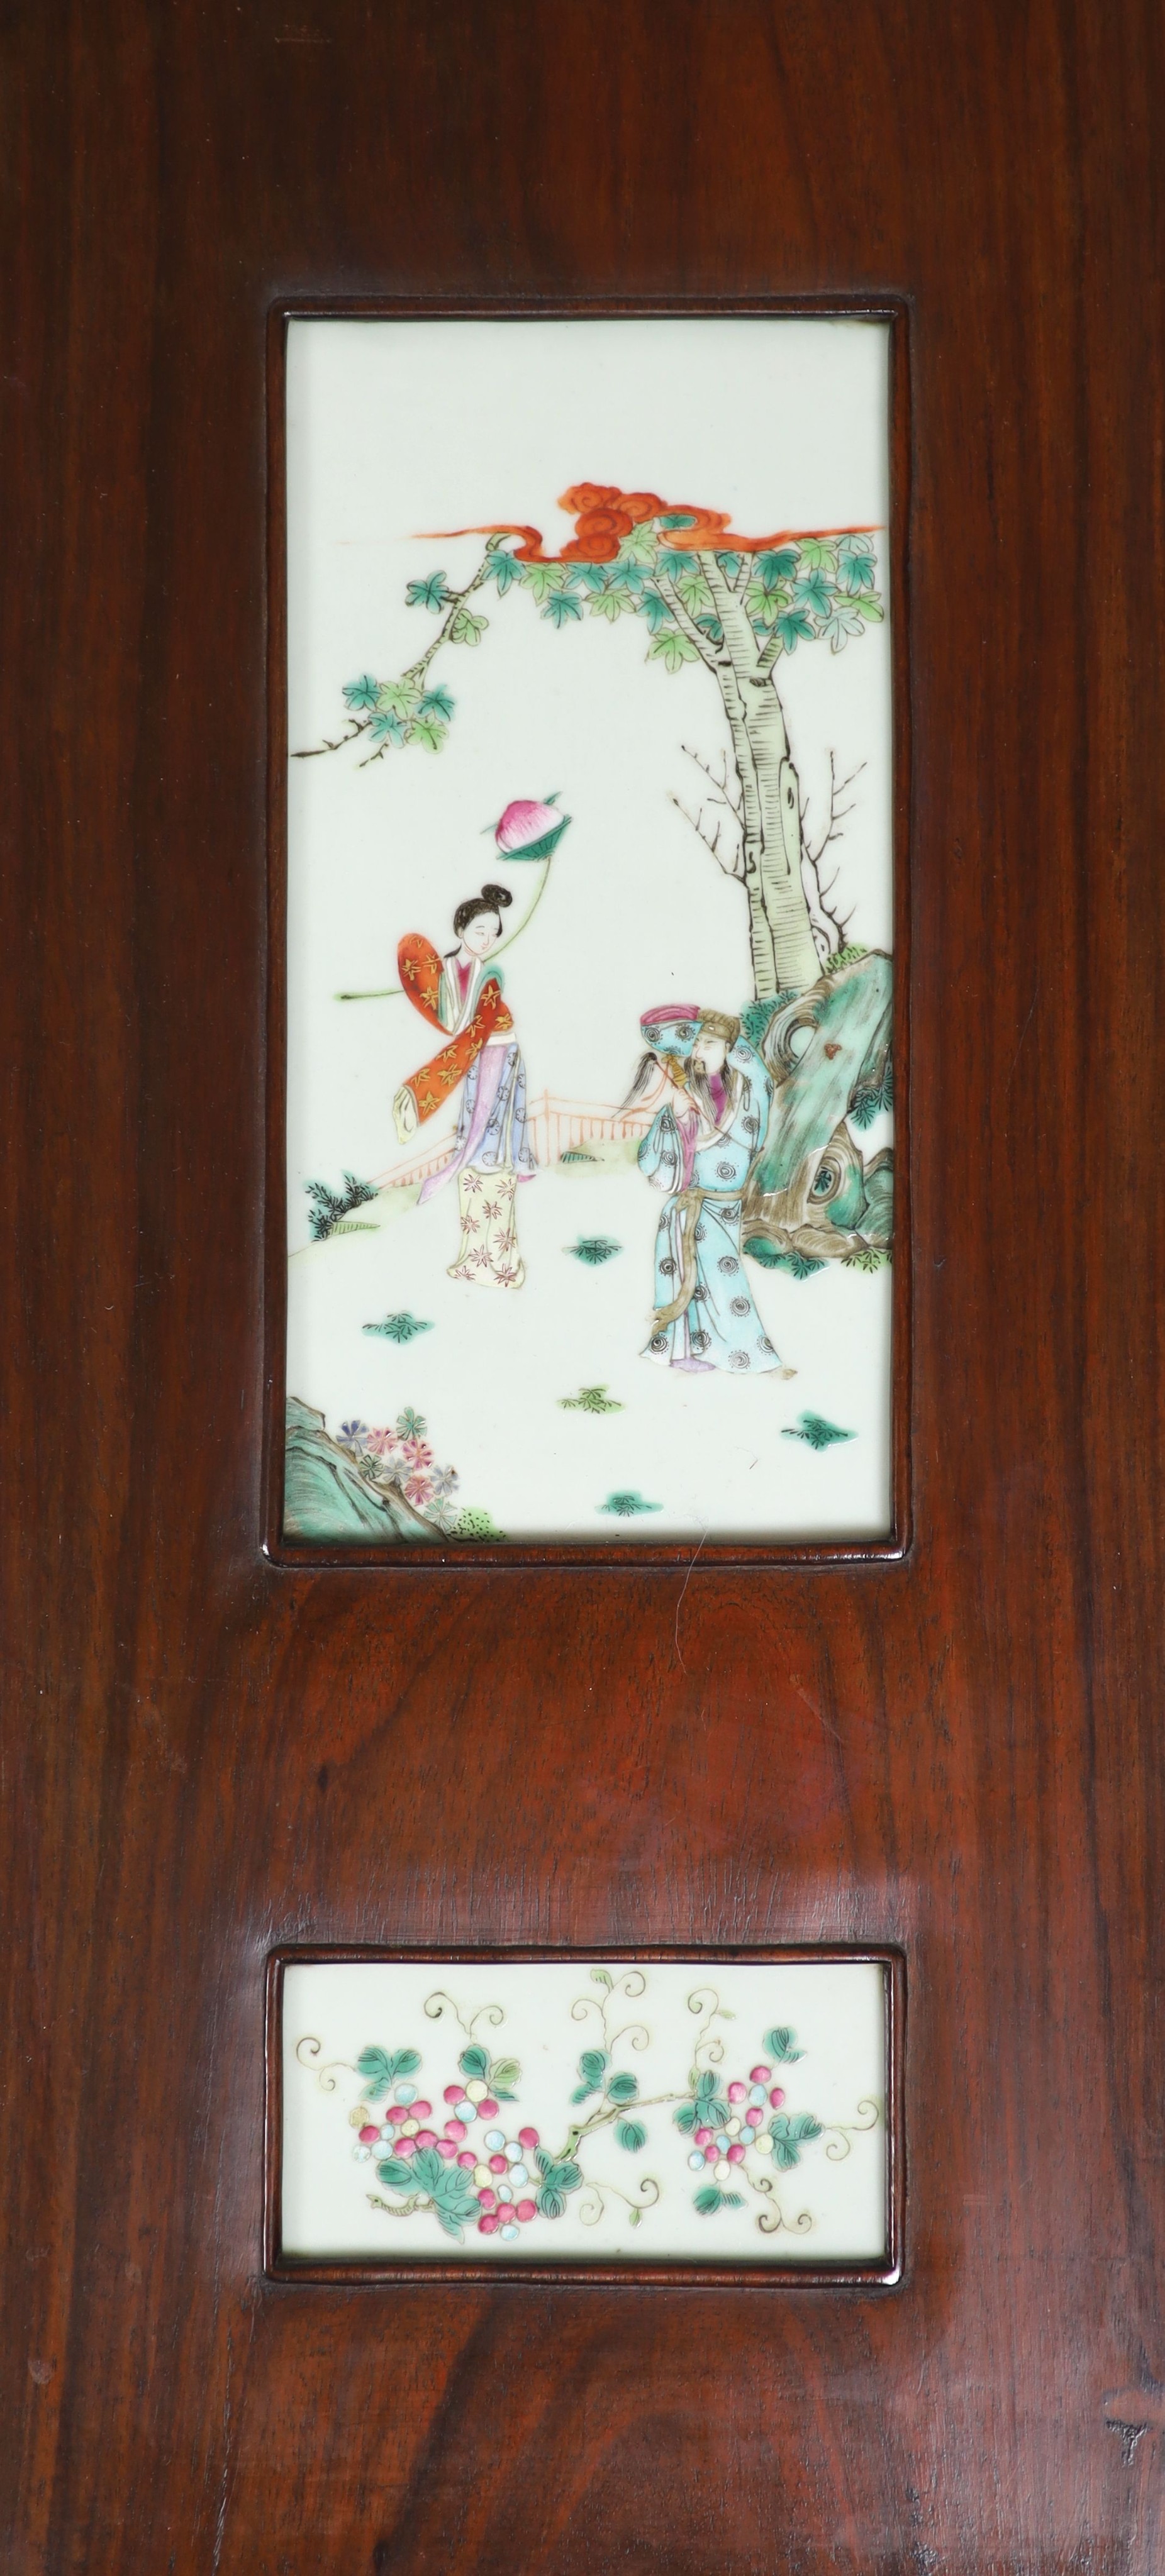 A Chinese porcelain mounted hardwood four fold screen, mid 19th century, Total size 127cm high x 122cm wide